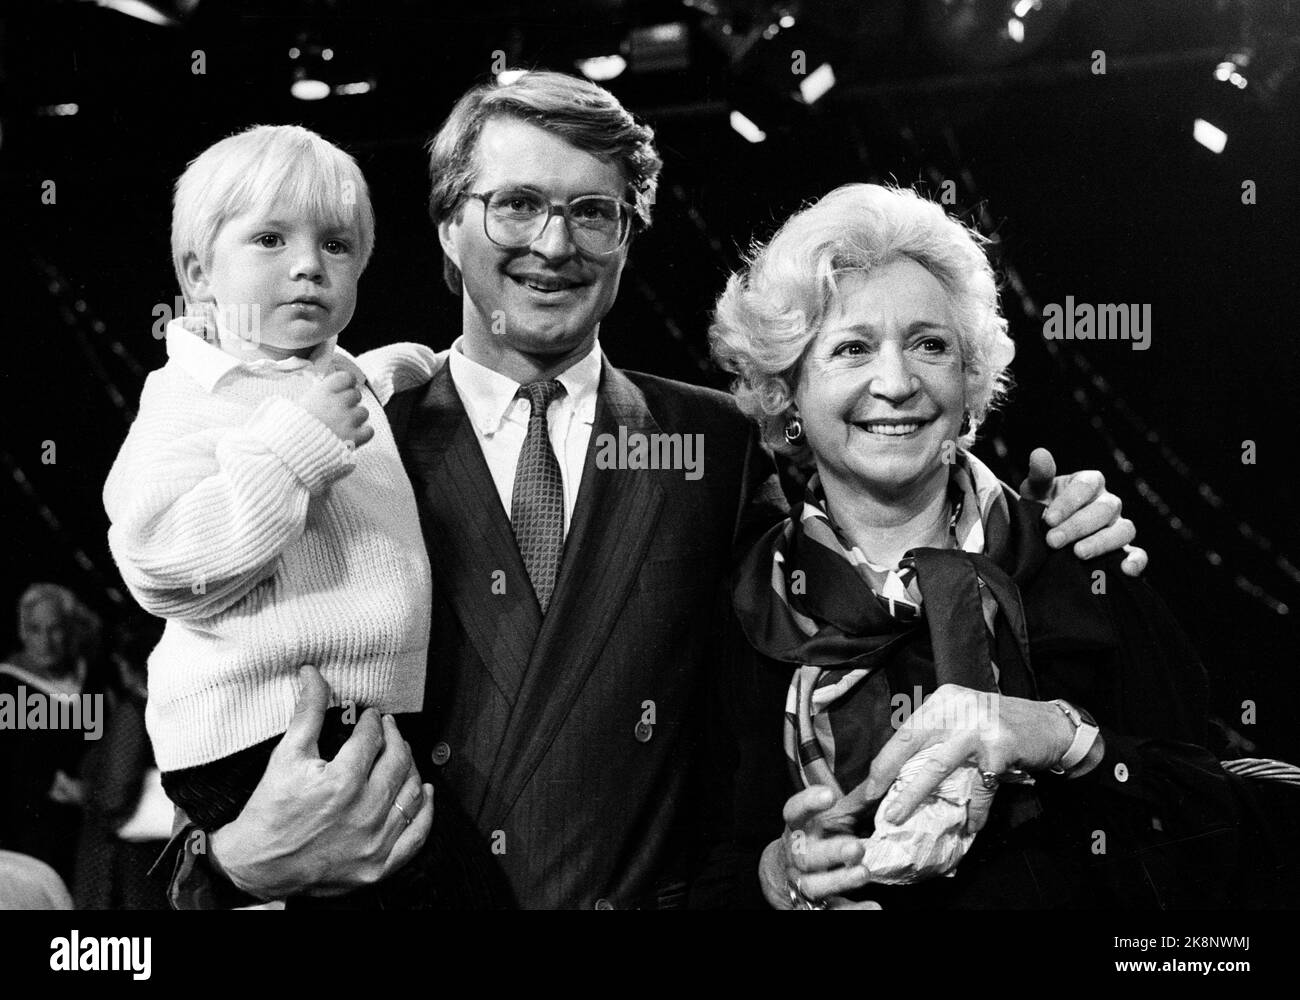 Oslo 1985-09: 'This is your life'. Actor Wenche Foss was the protagonist of Harald Tusberg's entertainment program 'This is your life' on September 29, 1985. Here Wenche Foss with his son Fabian Stang and his grandson Fabian Emil after the successful TV program. Photo: Henrik Laurvik Stock Photo